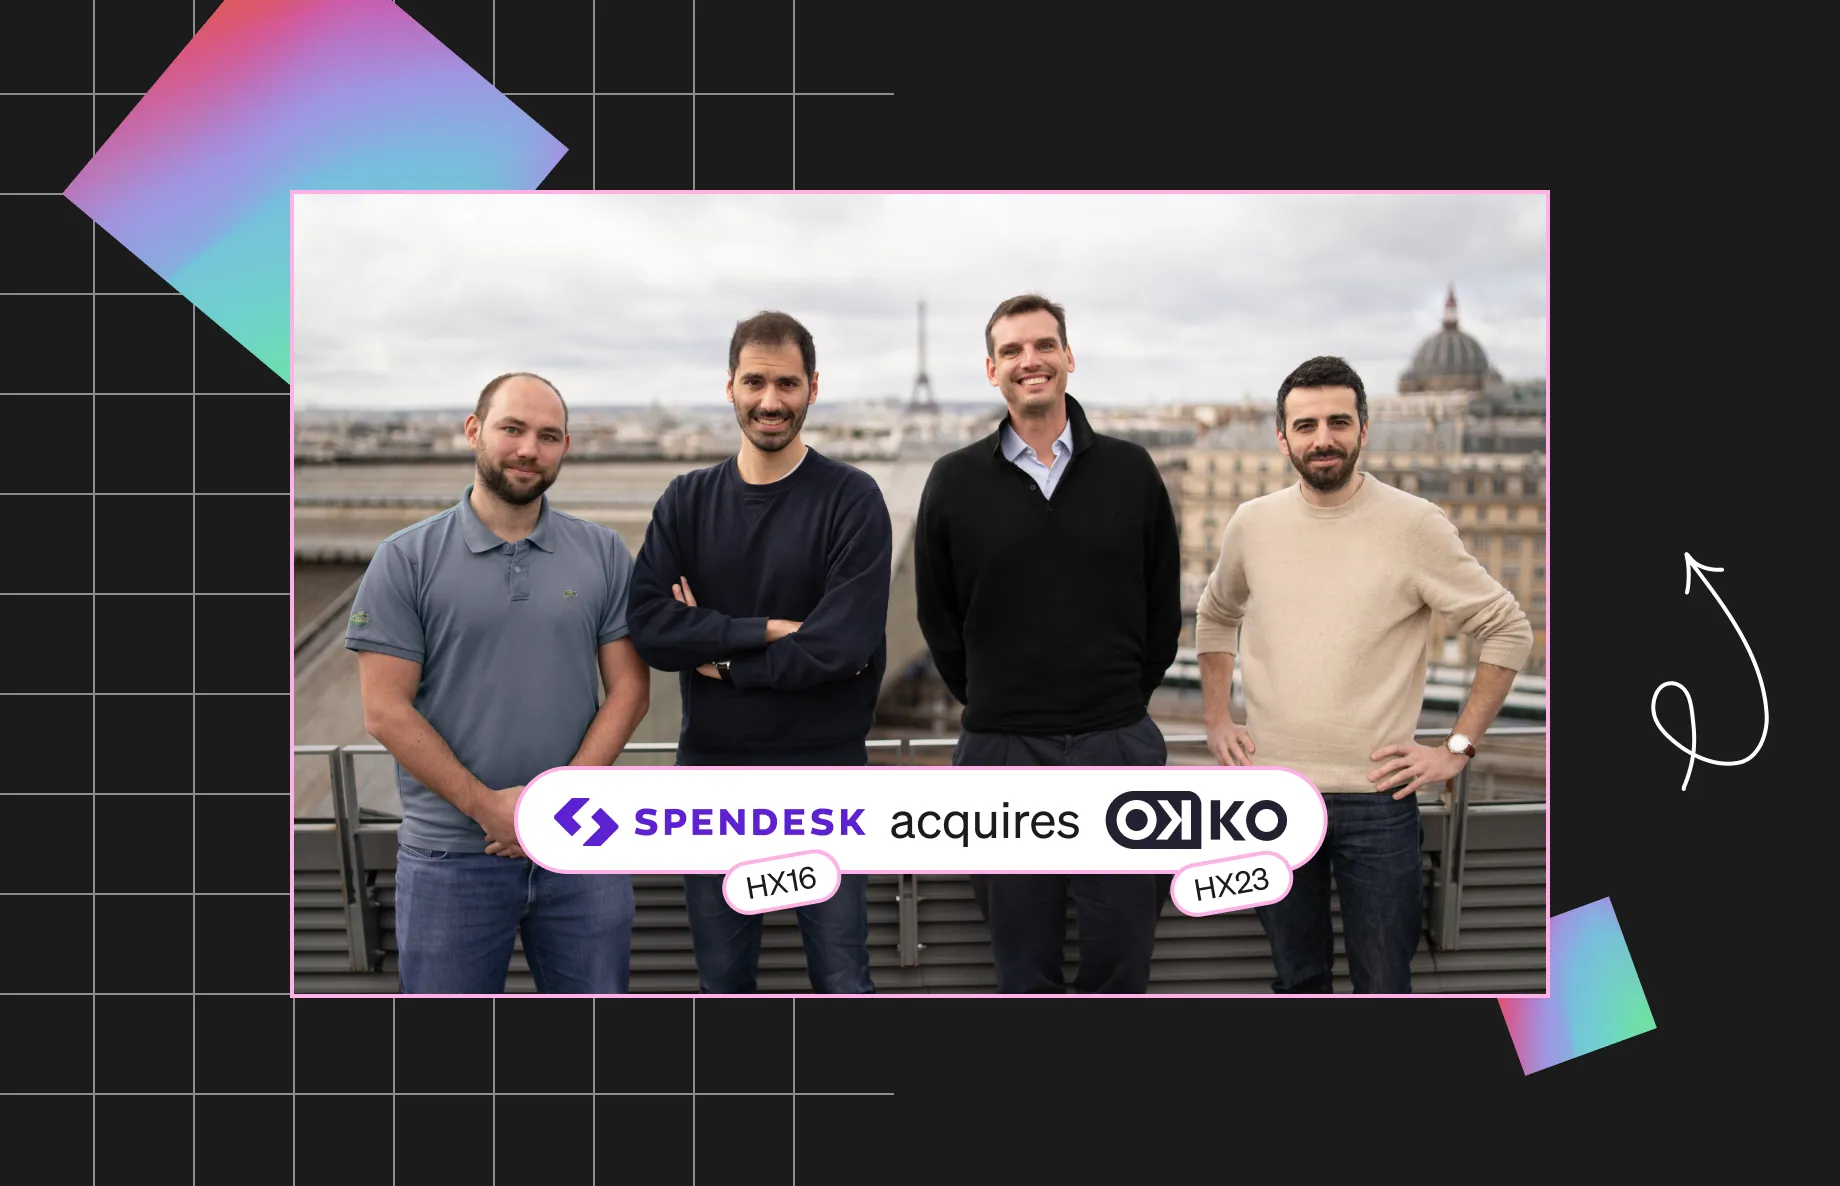 Spendesk (HX16) acquires Okko (HX23) to fully integrate procurement and spend management